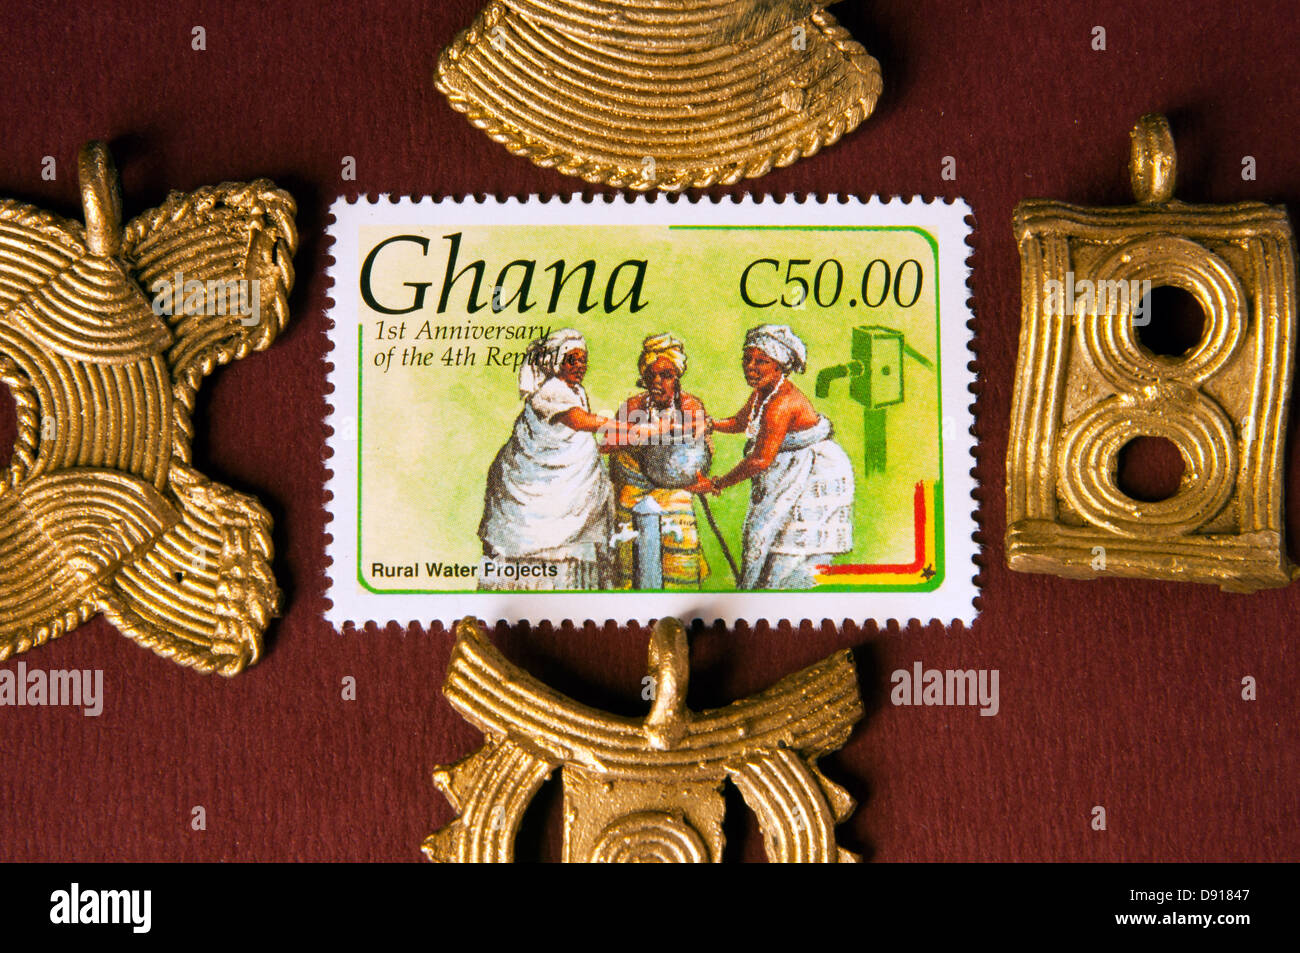 bronze symbolic images and postage stamp, ghana, in studio setting Stock Photo